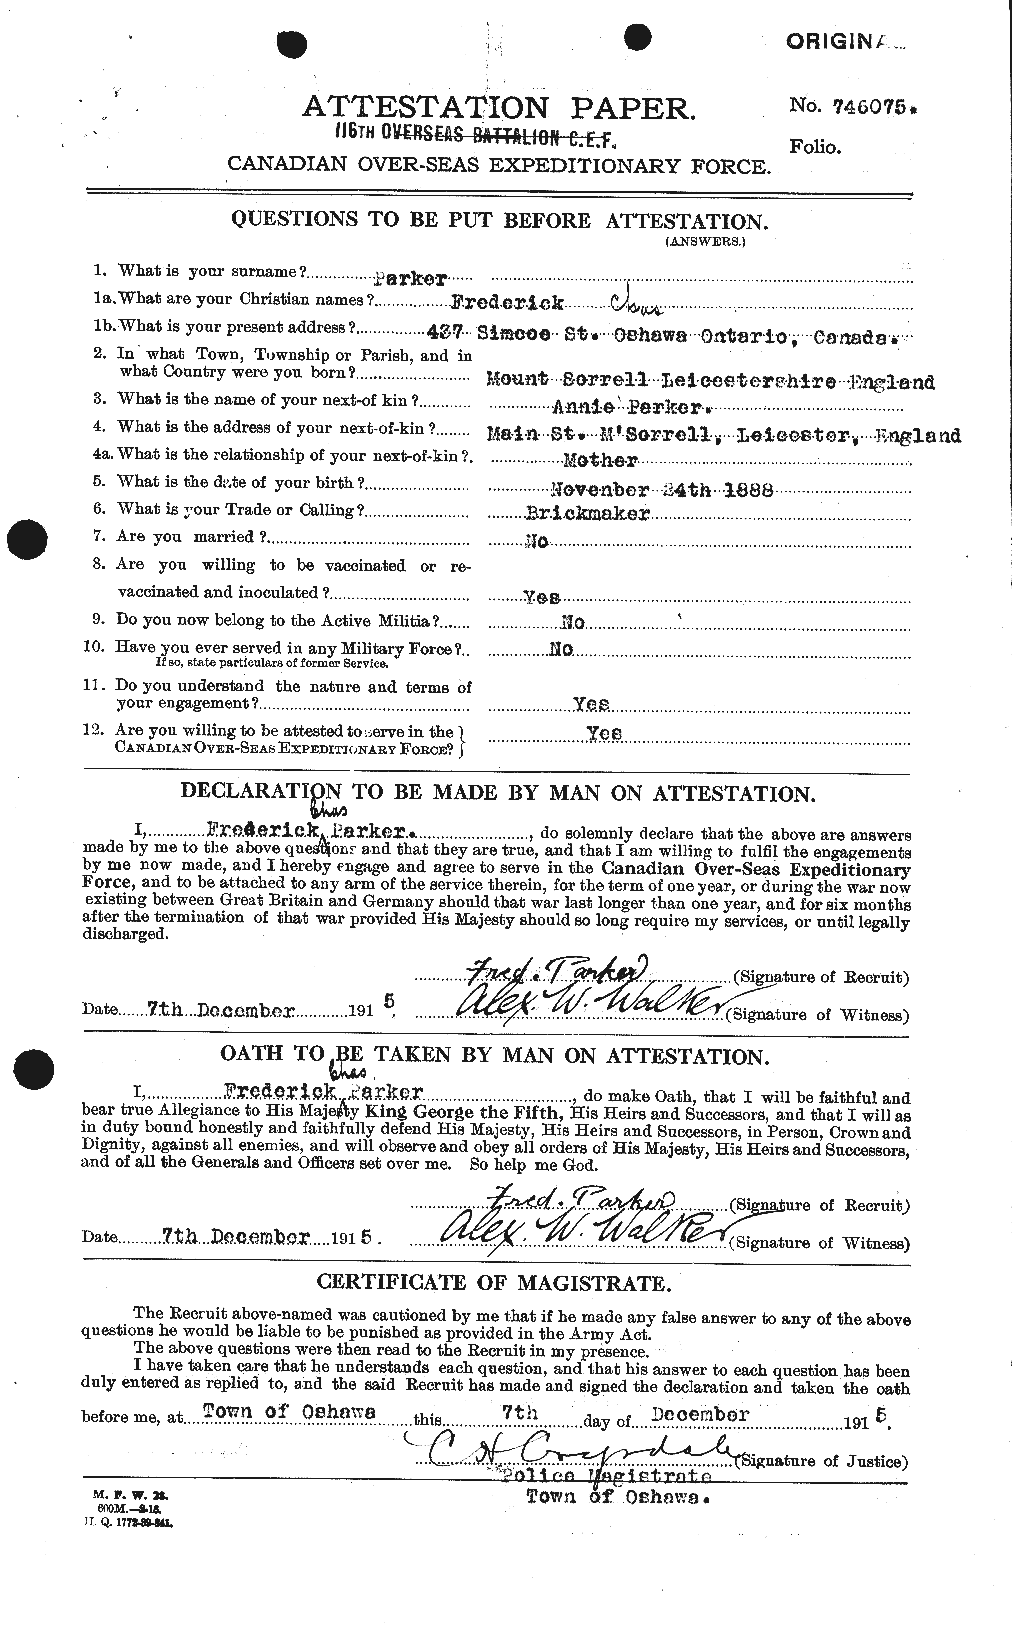 Personnel Records of the First World War - CEF 565212a